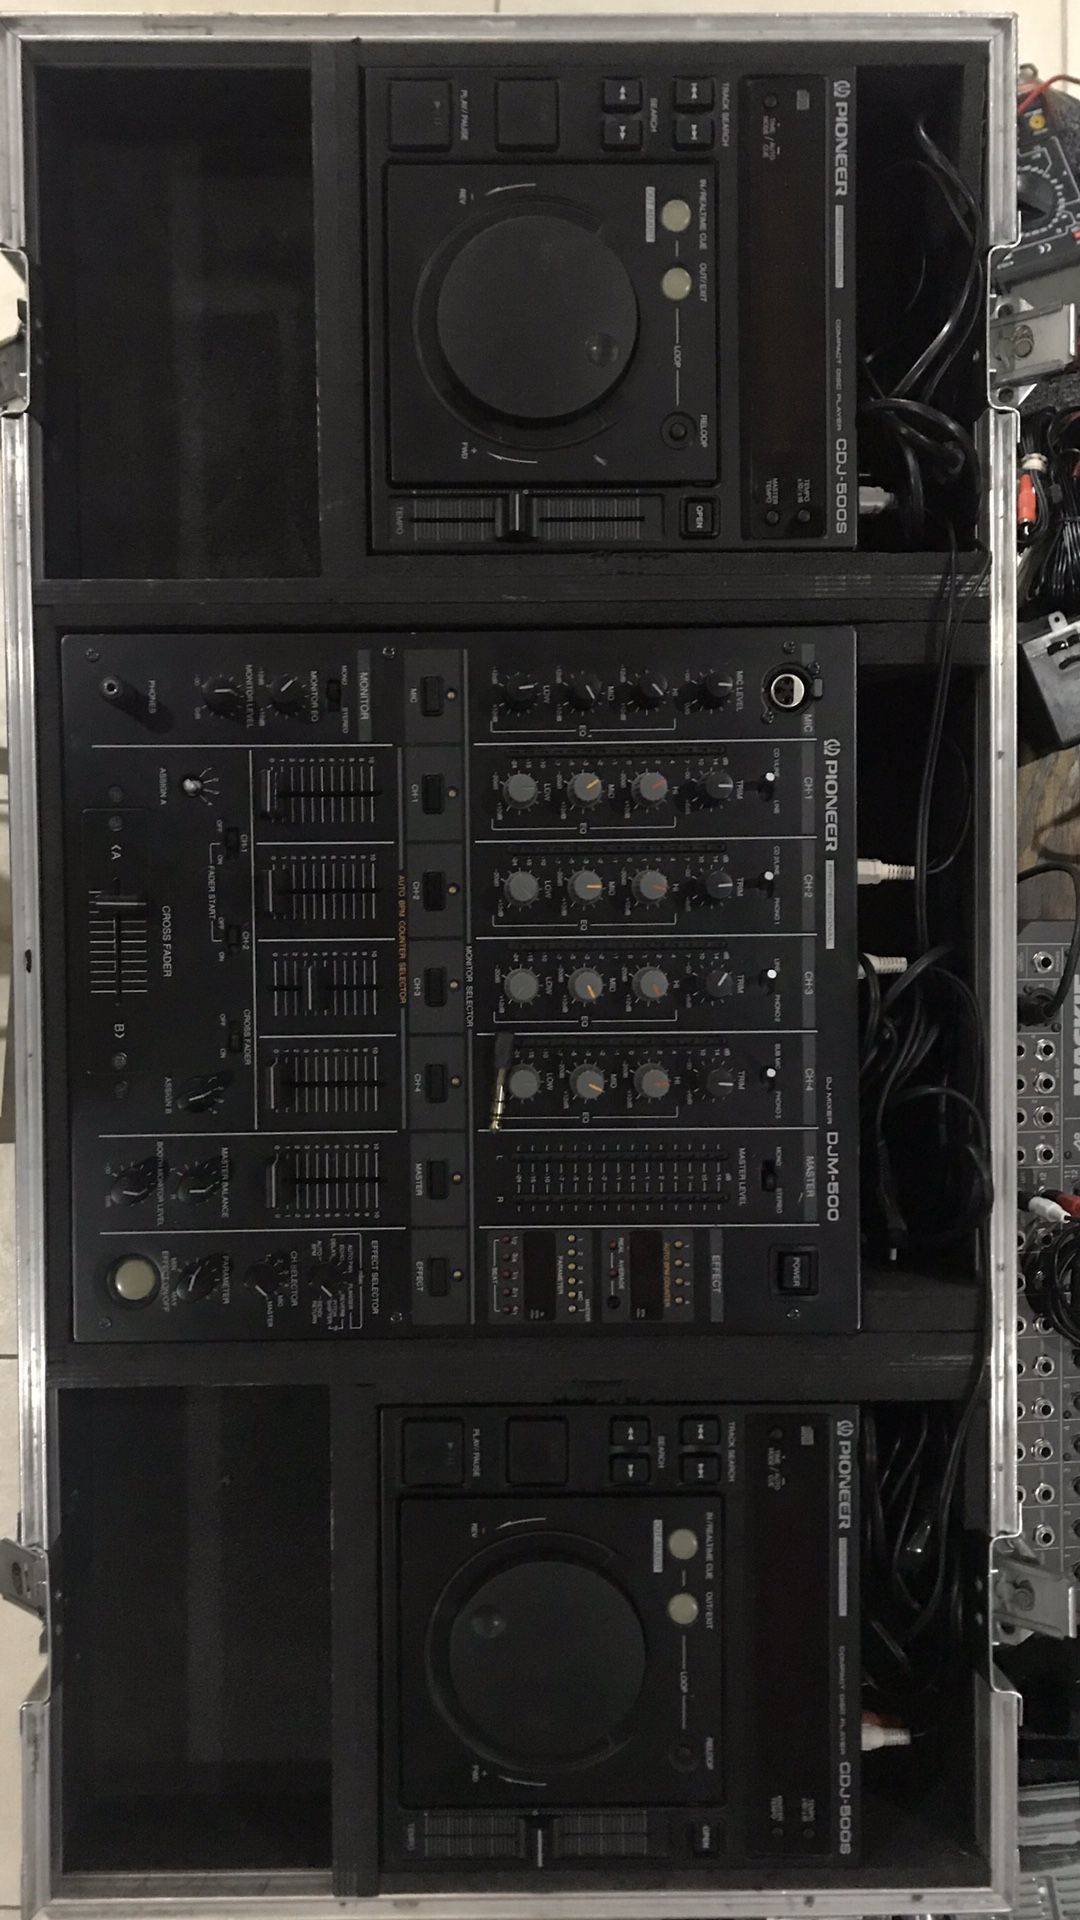 Poineer DJ equipment. Serious buyers only. Please don’t make a deal and do not pick up.